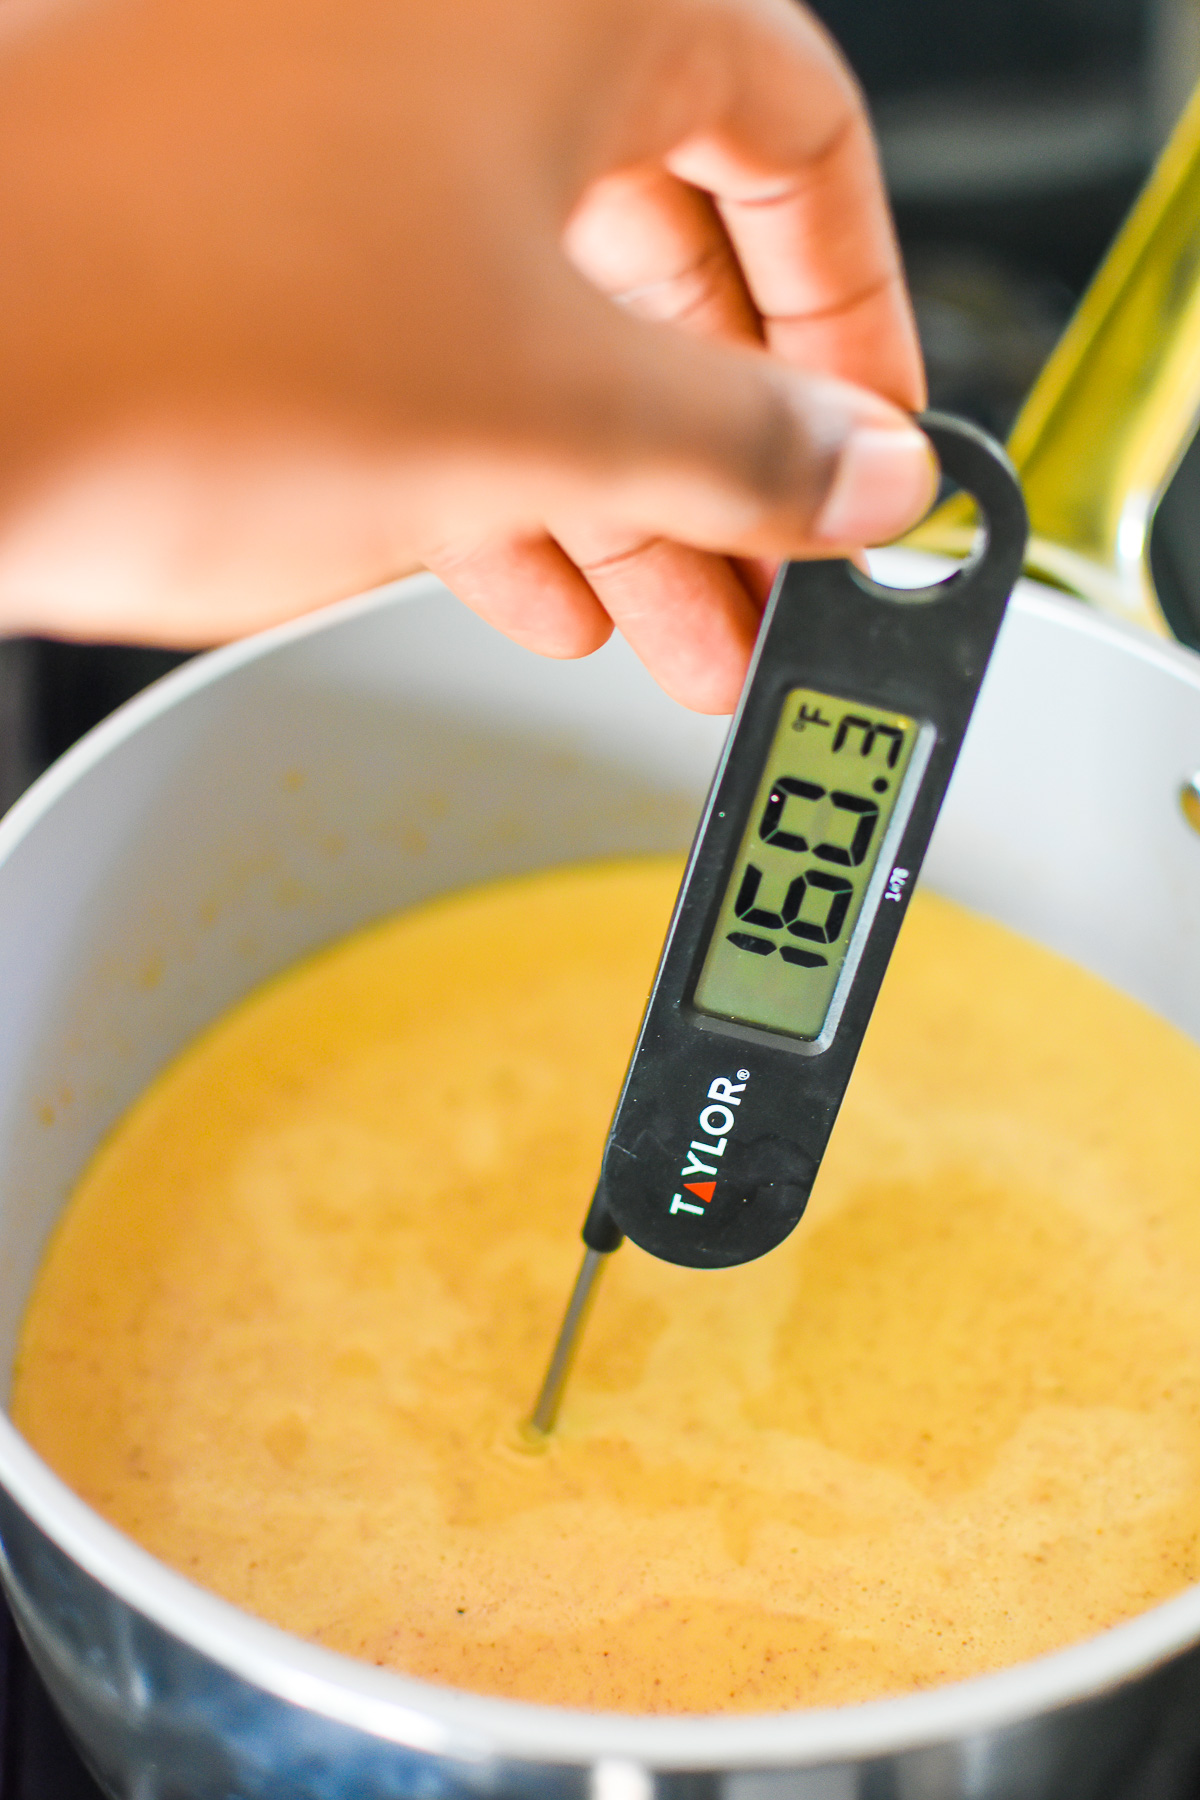 food thermometer reading 160.3 degrees farenheit in a pot of homemade eggnog.